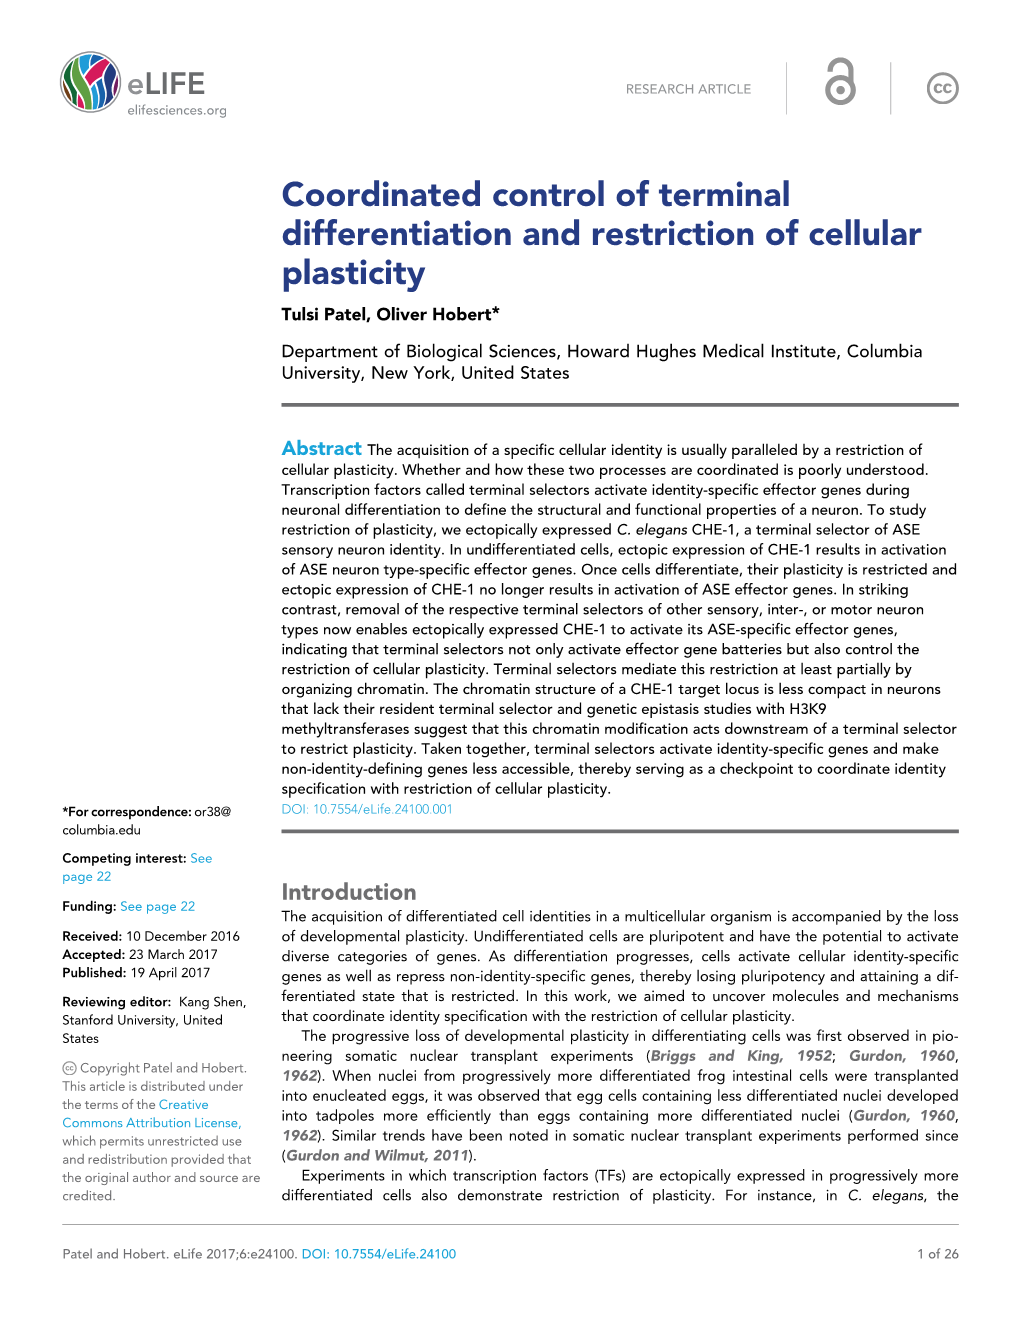 Coordinated Control of Terminal Differentiation and Restriction of Cellular Plasticity Tulsi Patel, Oliver Hobert*